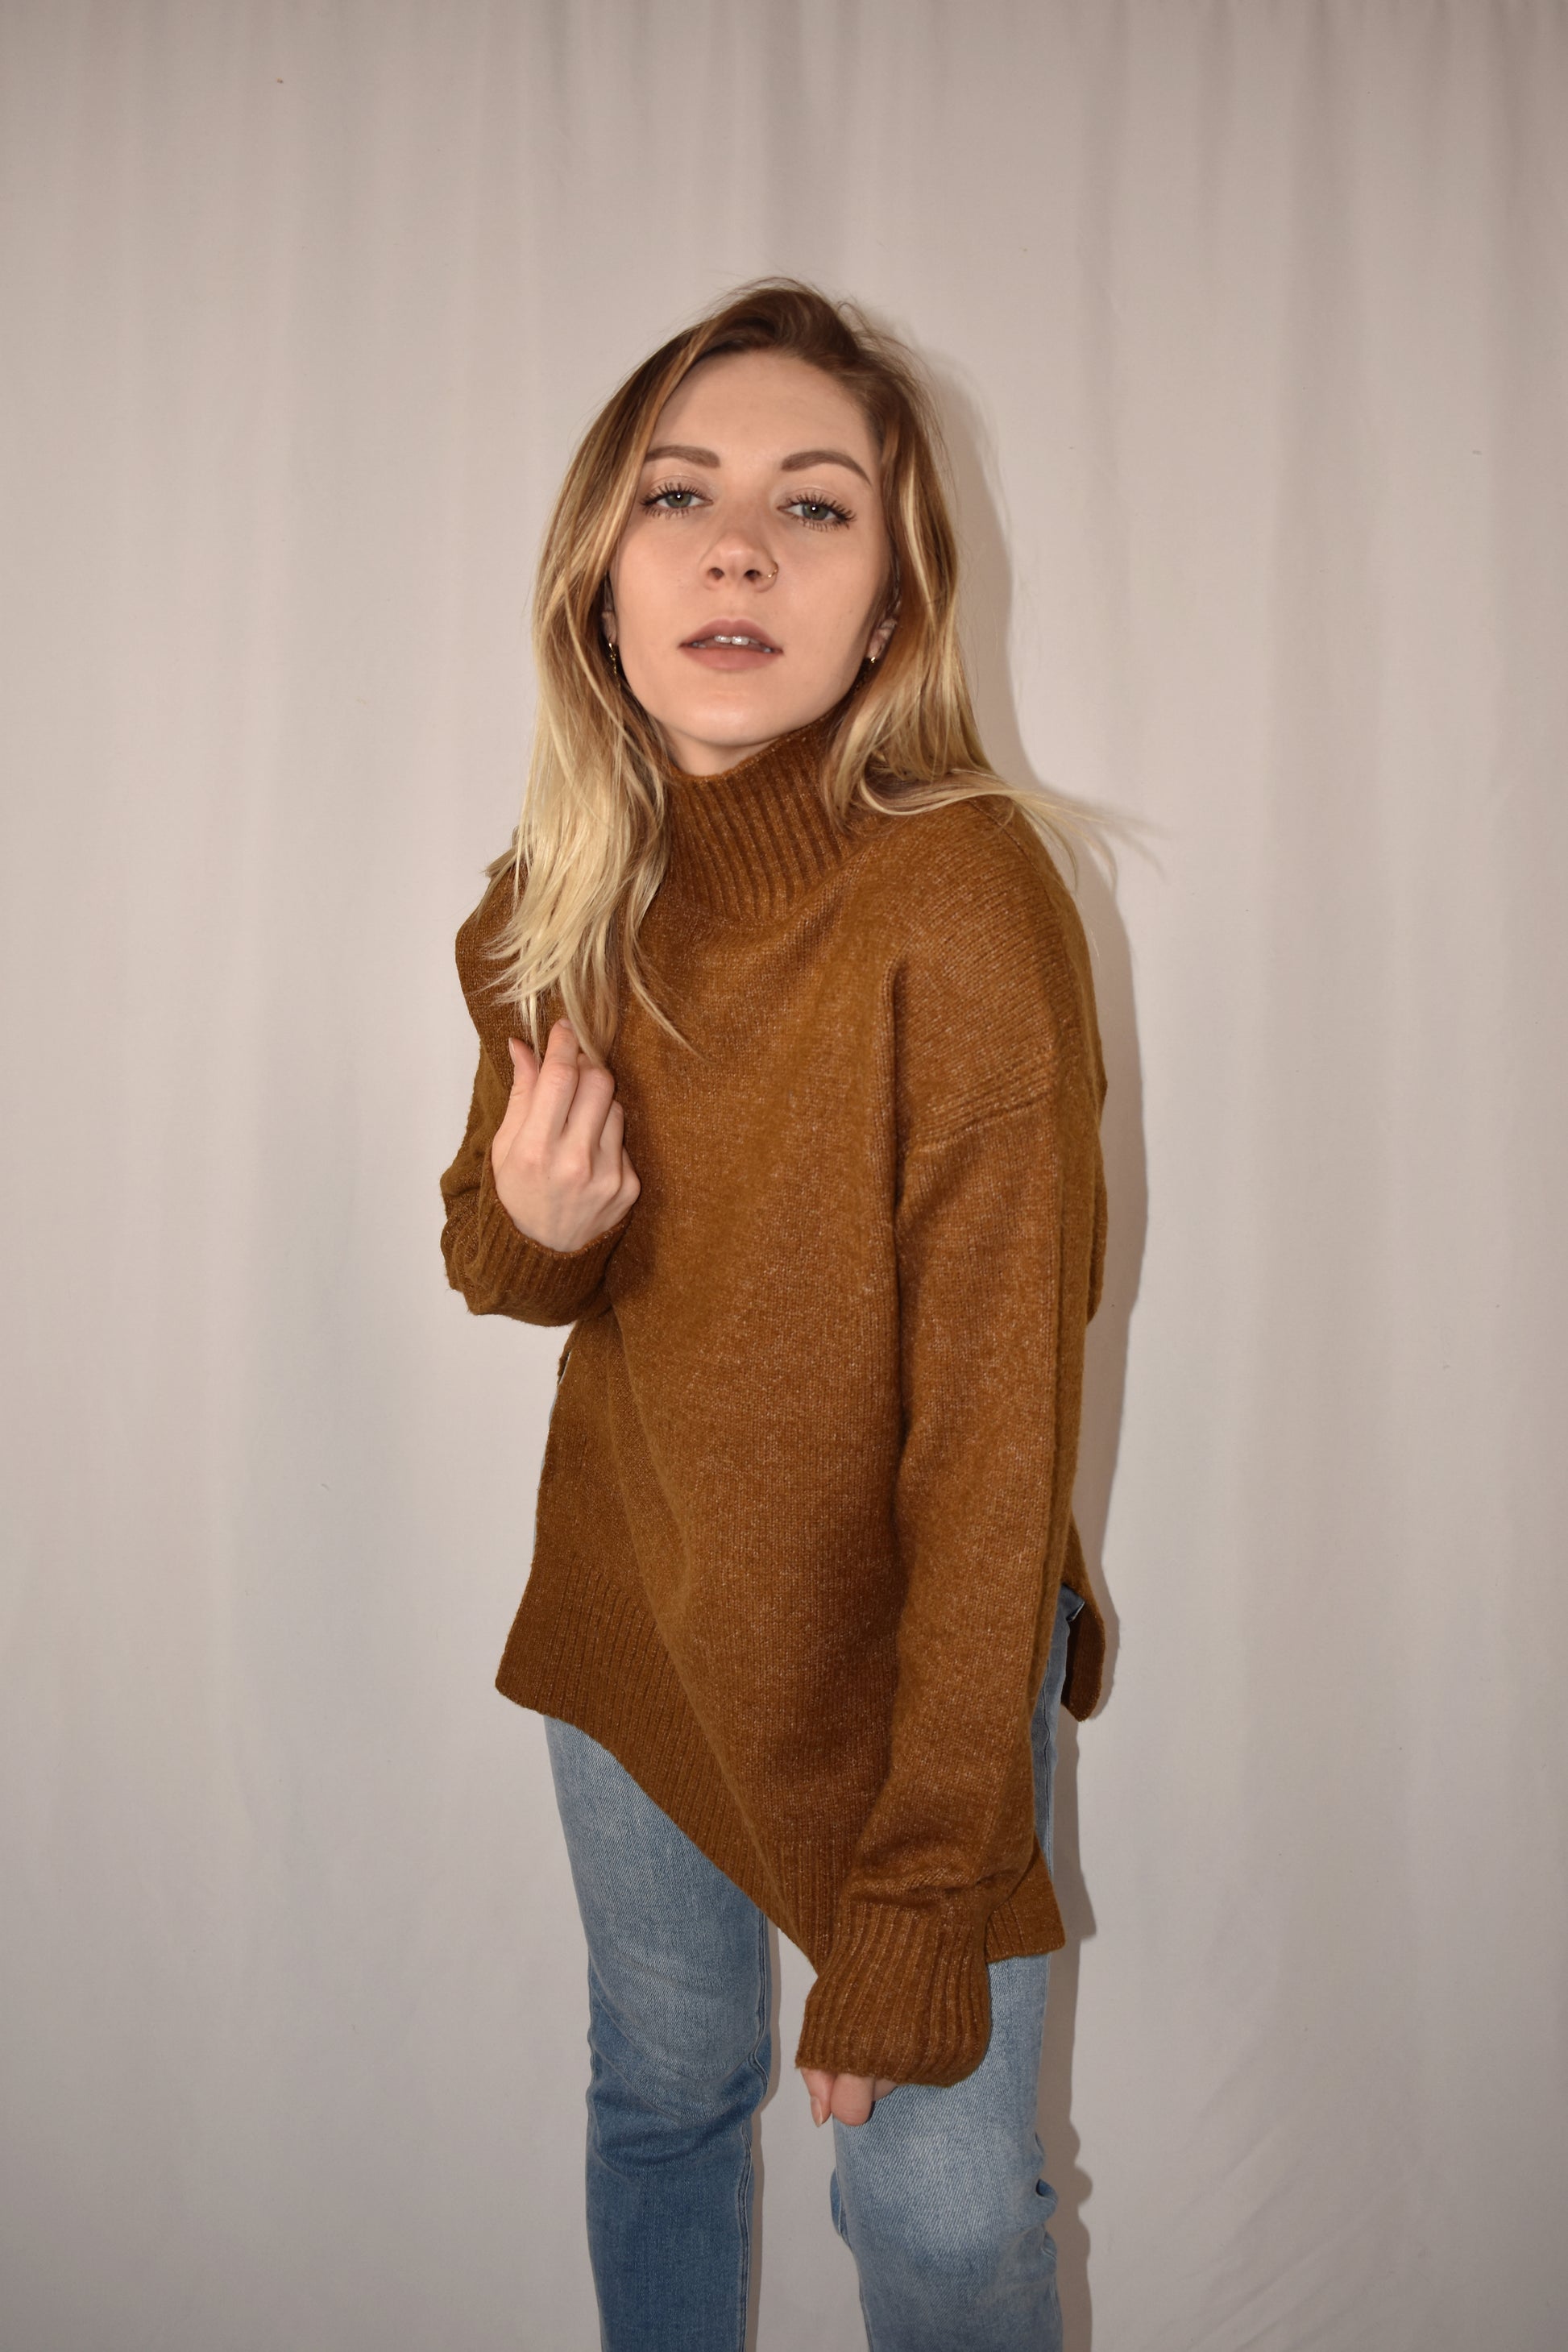 boxy high neck sweater with turtleneck that doesn't fold over. full length with side slits.